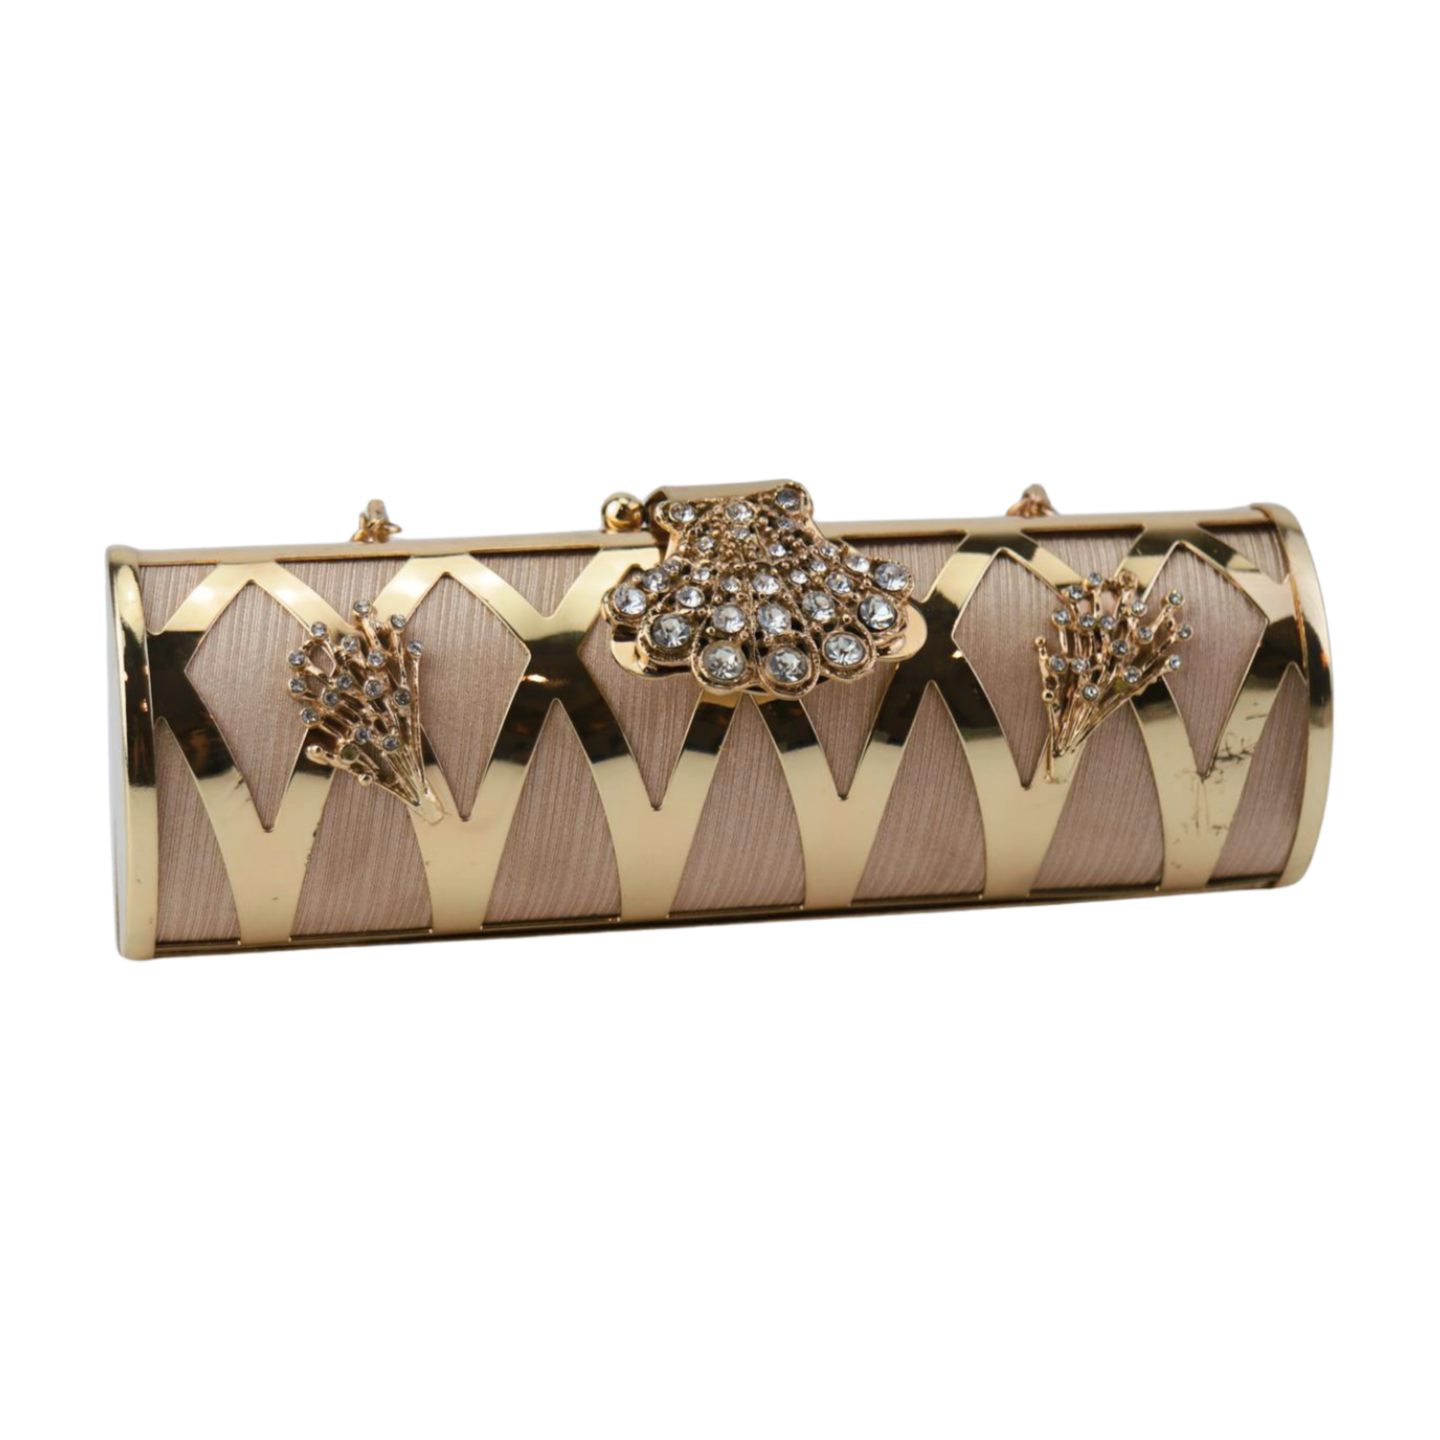 Stylish Glittering Gold Clutch Bag with Flowers and Swarovski Crystals For Wedding And Party